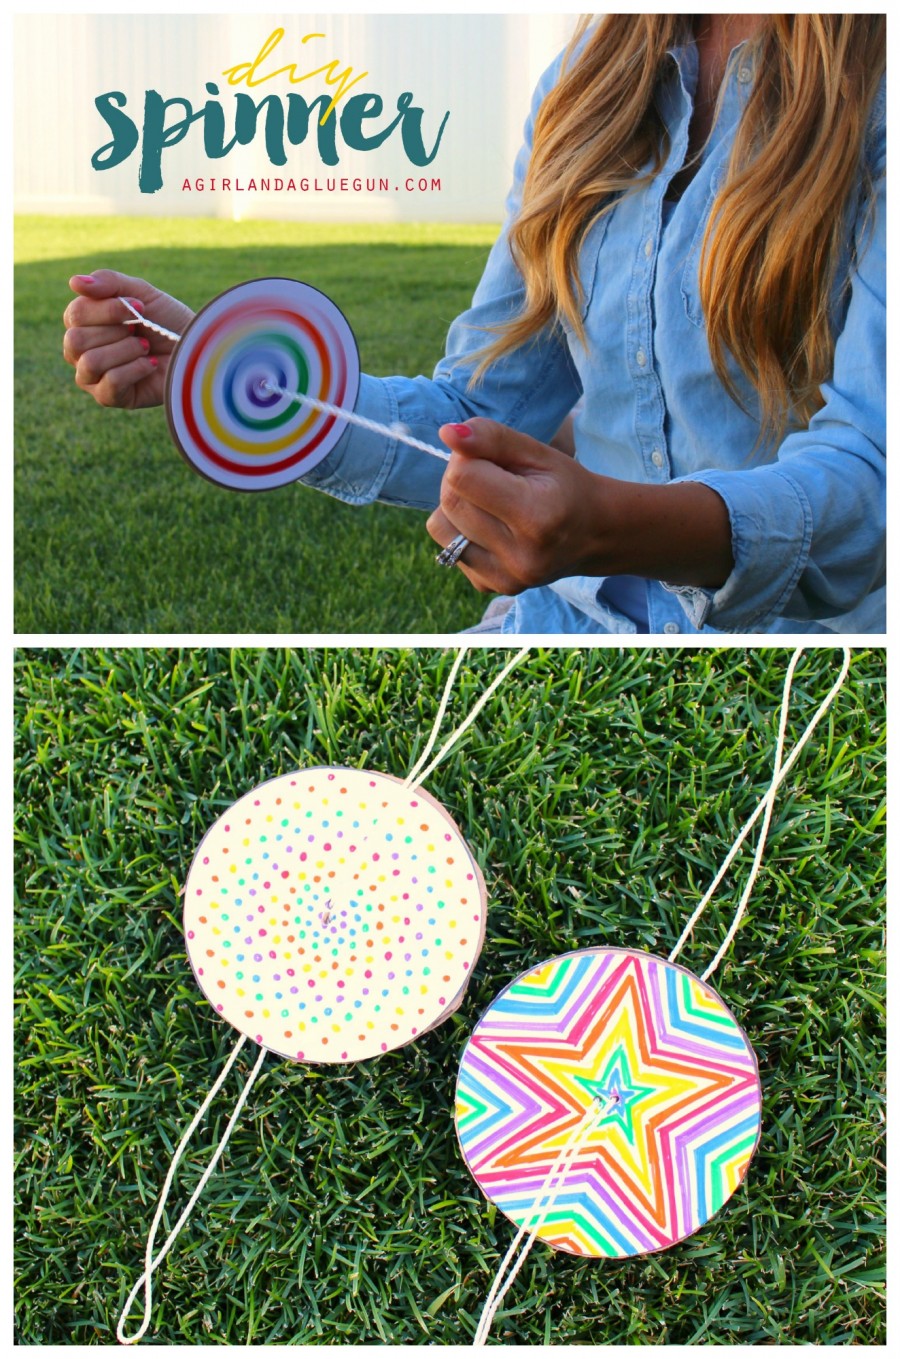 50-quick-easy-kids-crafts-that-anyone-can-make-happiness-is-homemade